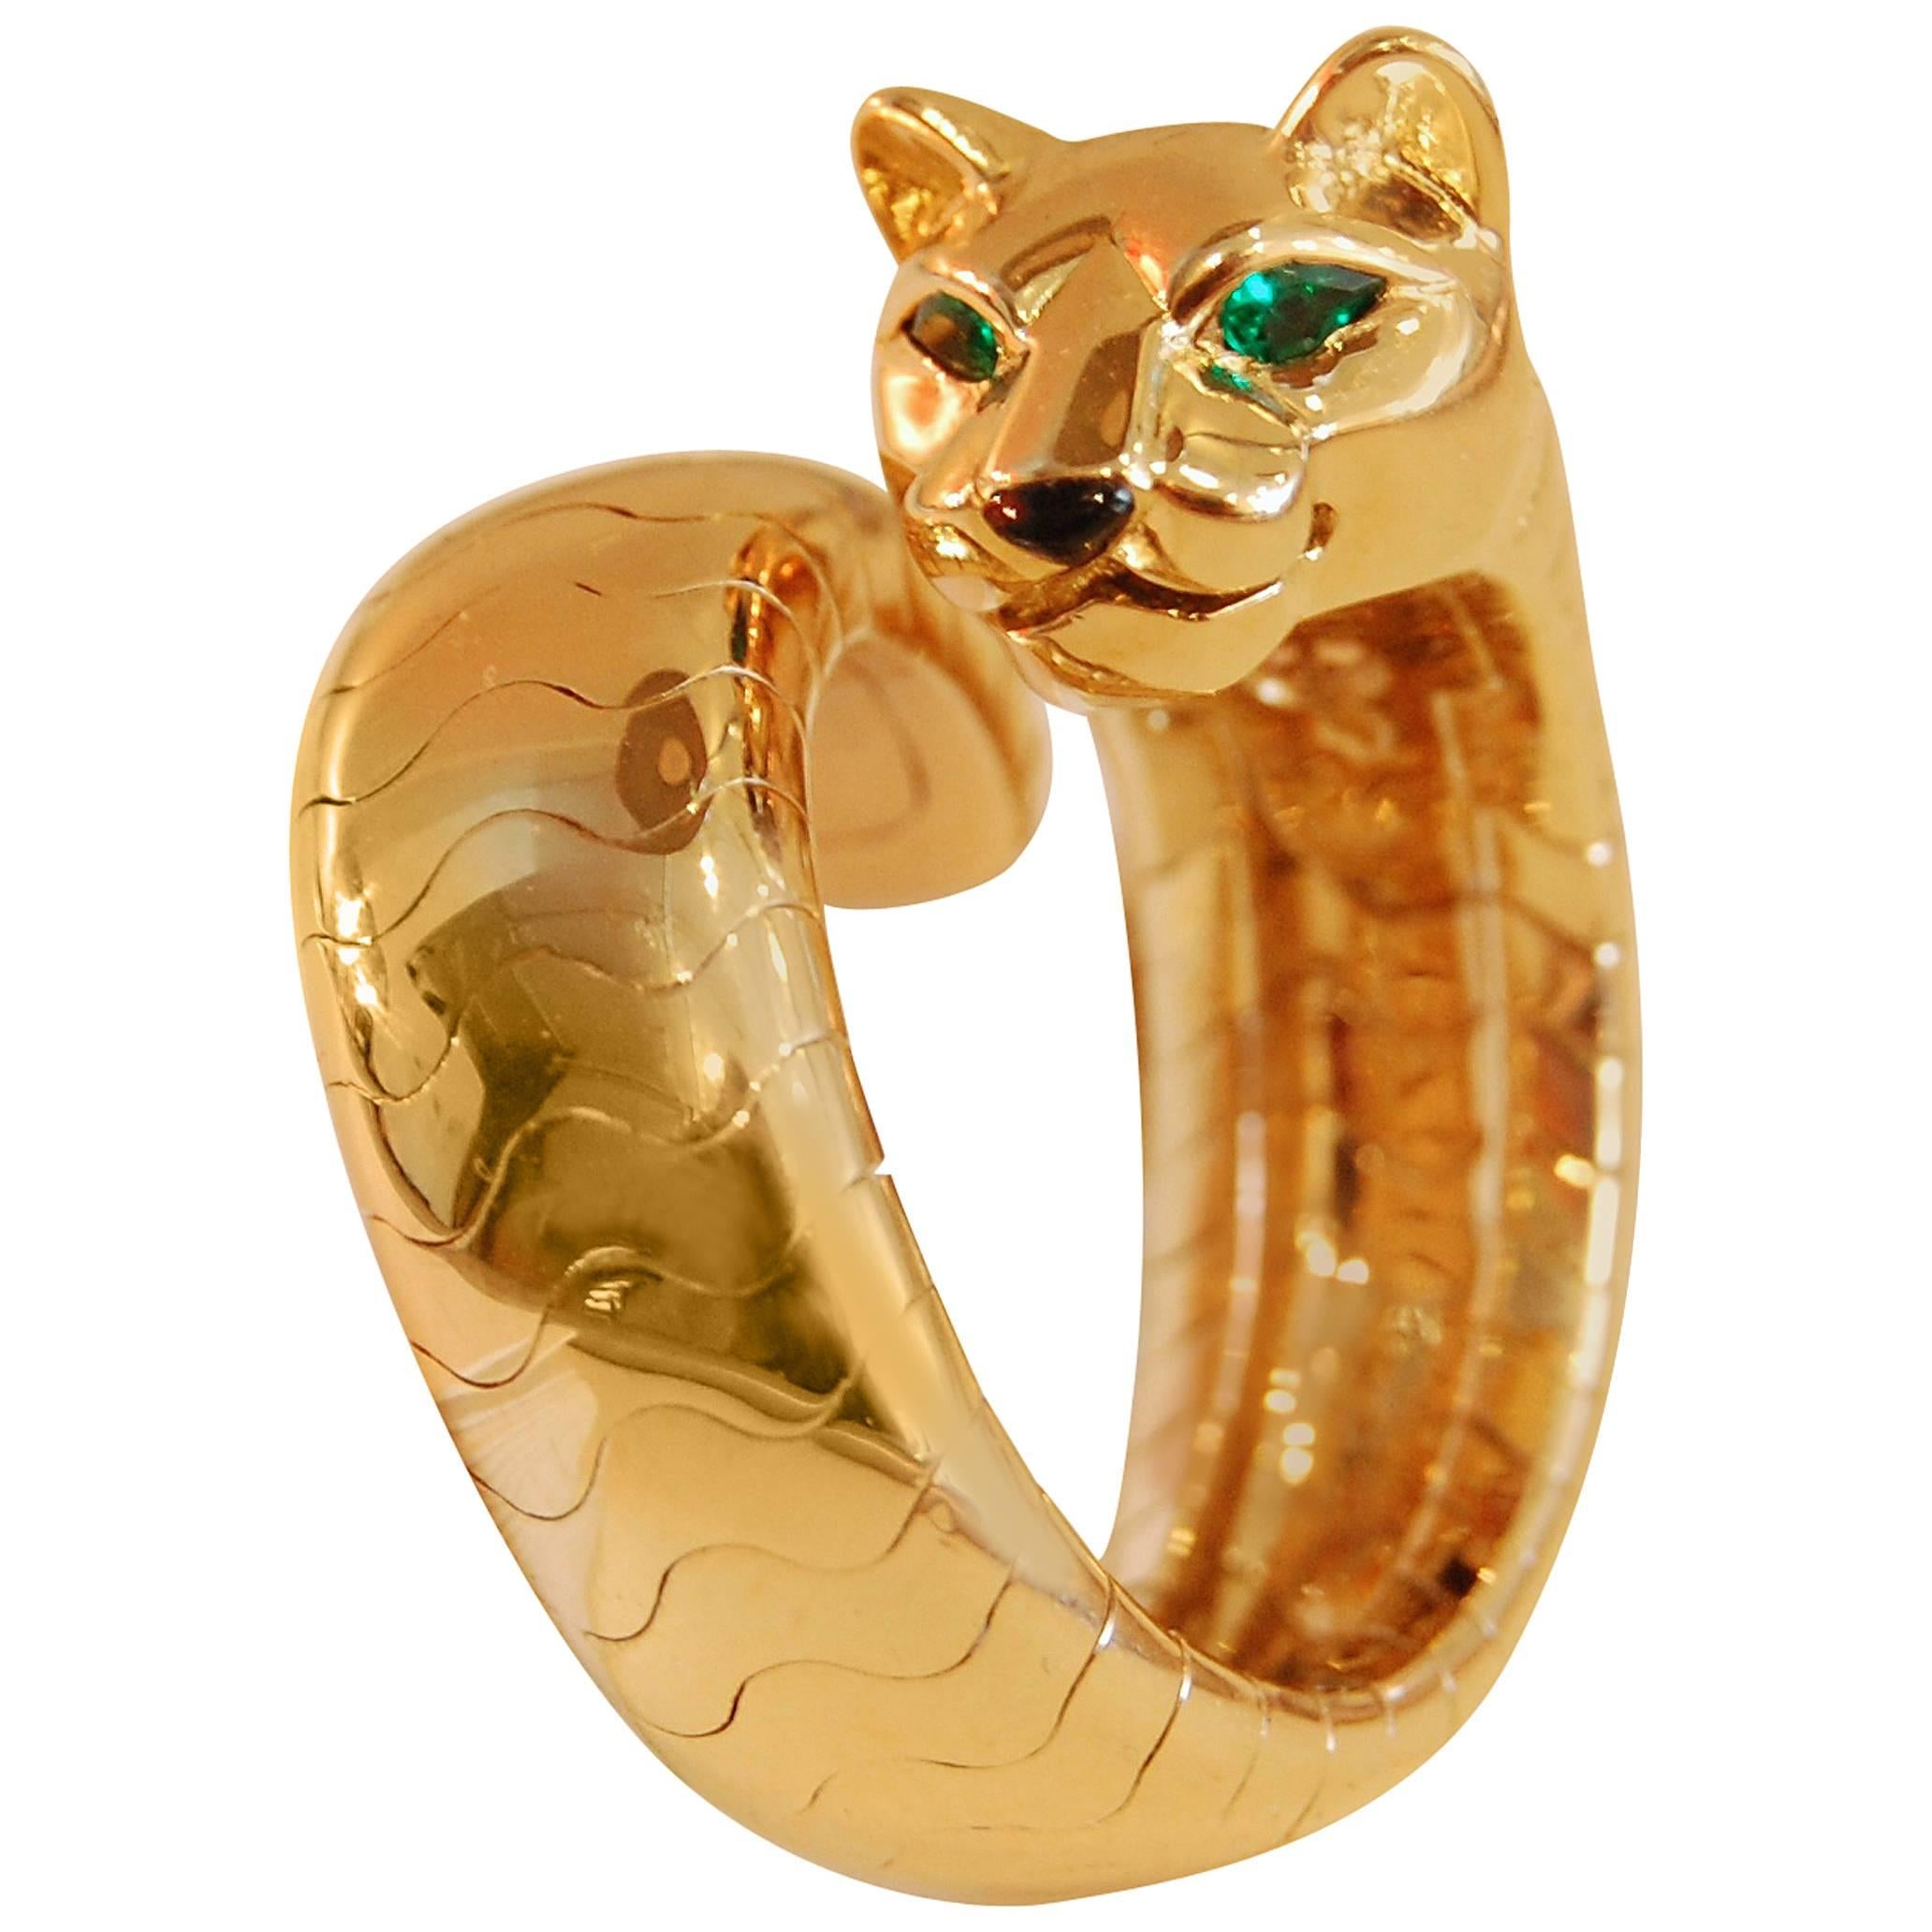 Cartier Panthere 18-Karat Gold, Onyx and Emerald Ring